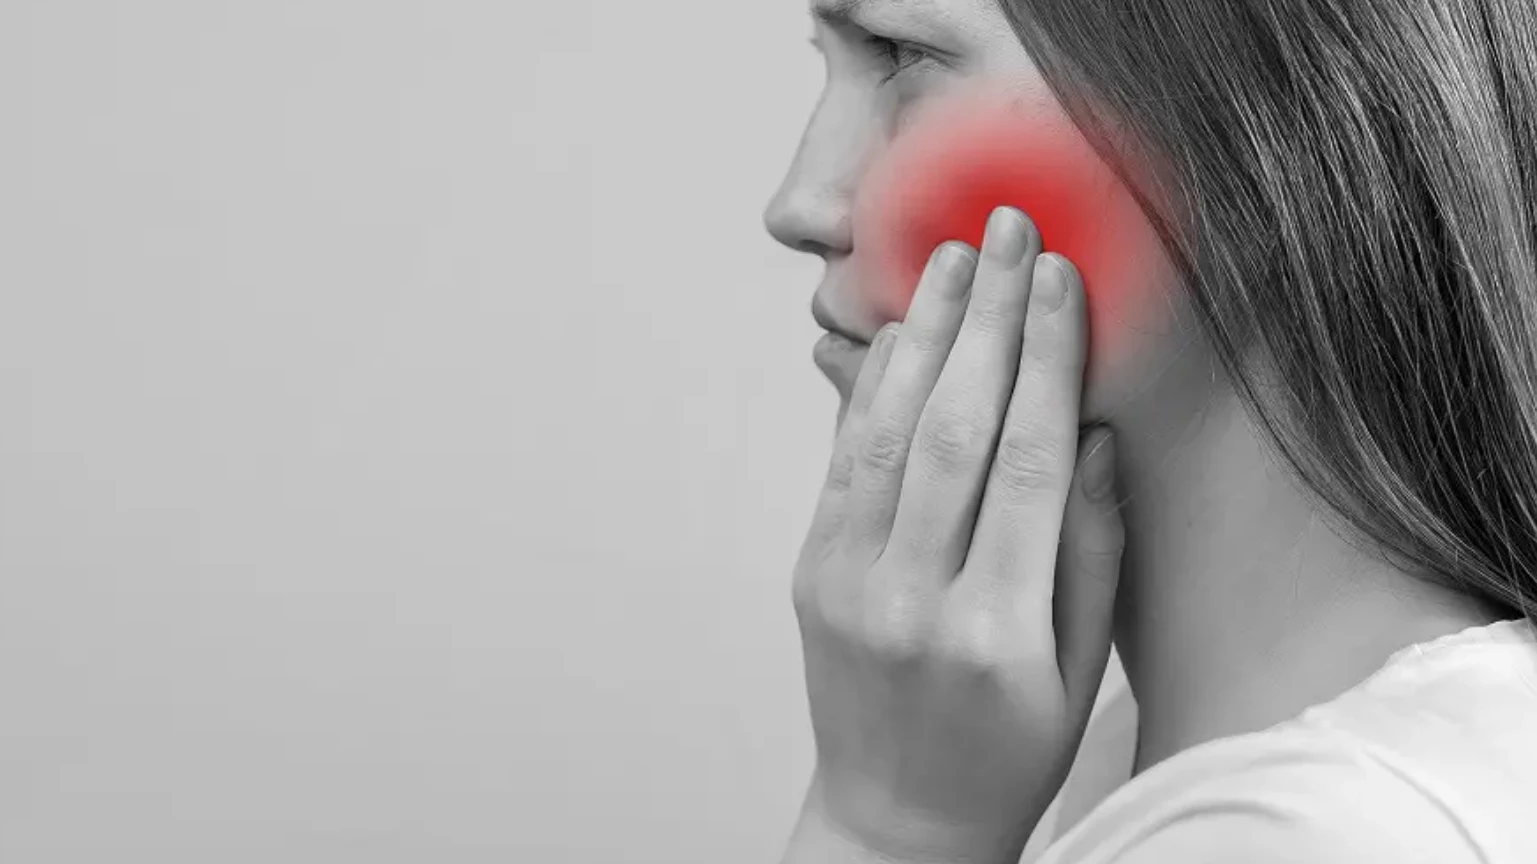 Dental Checkups Easing Jaw Discomfort Stemming from Toothache